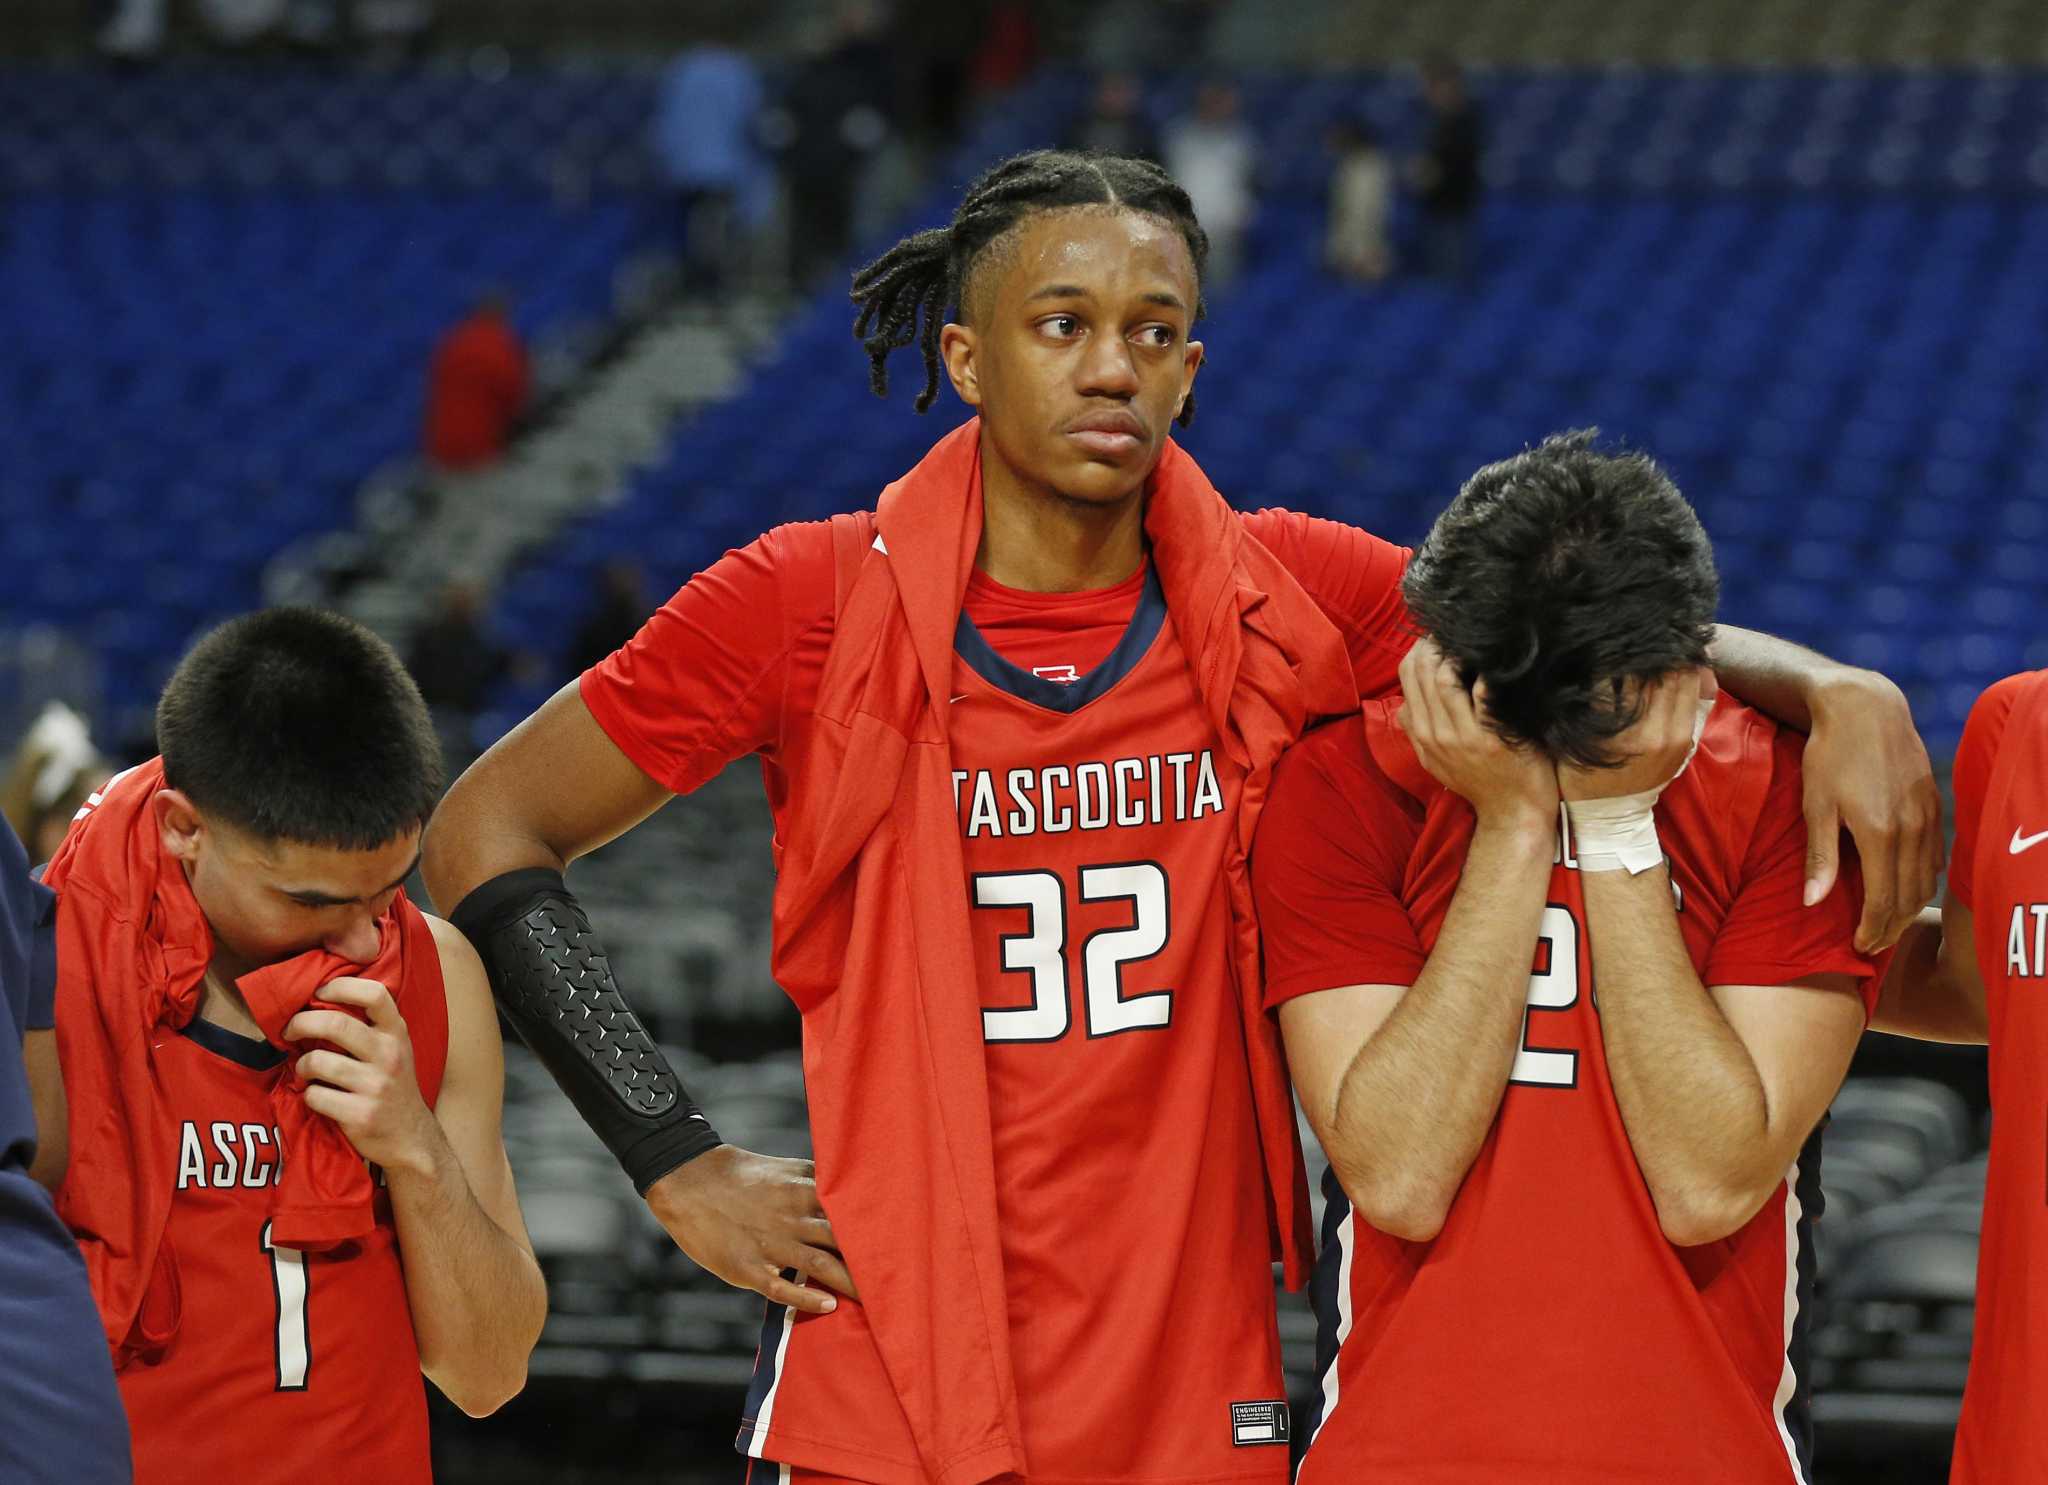 Atascocita finds solace in another trip to state tournament